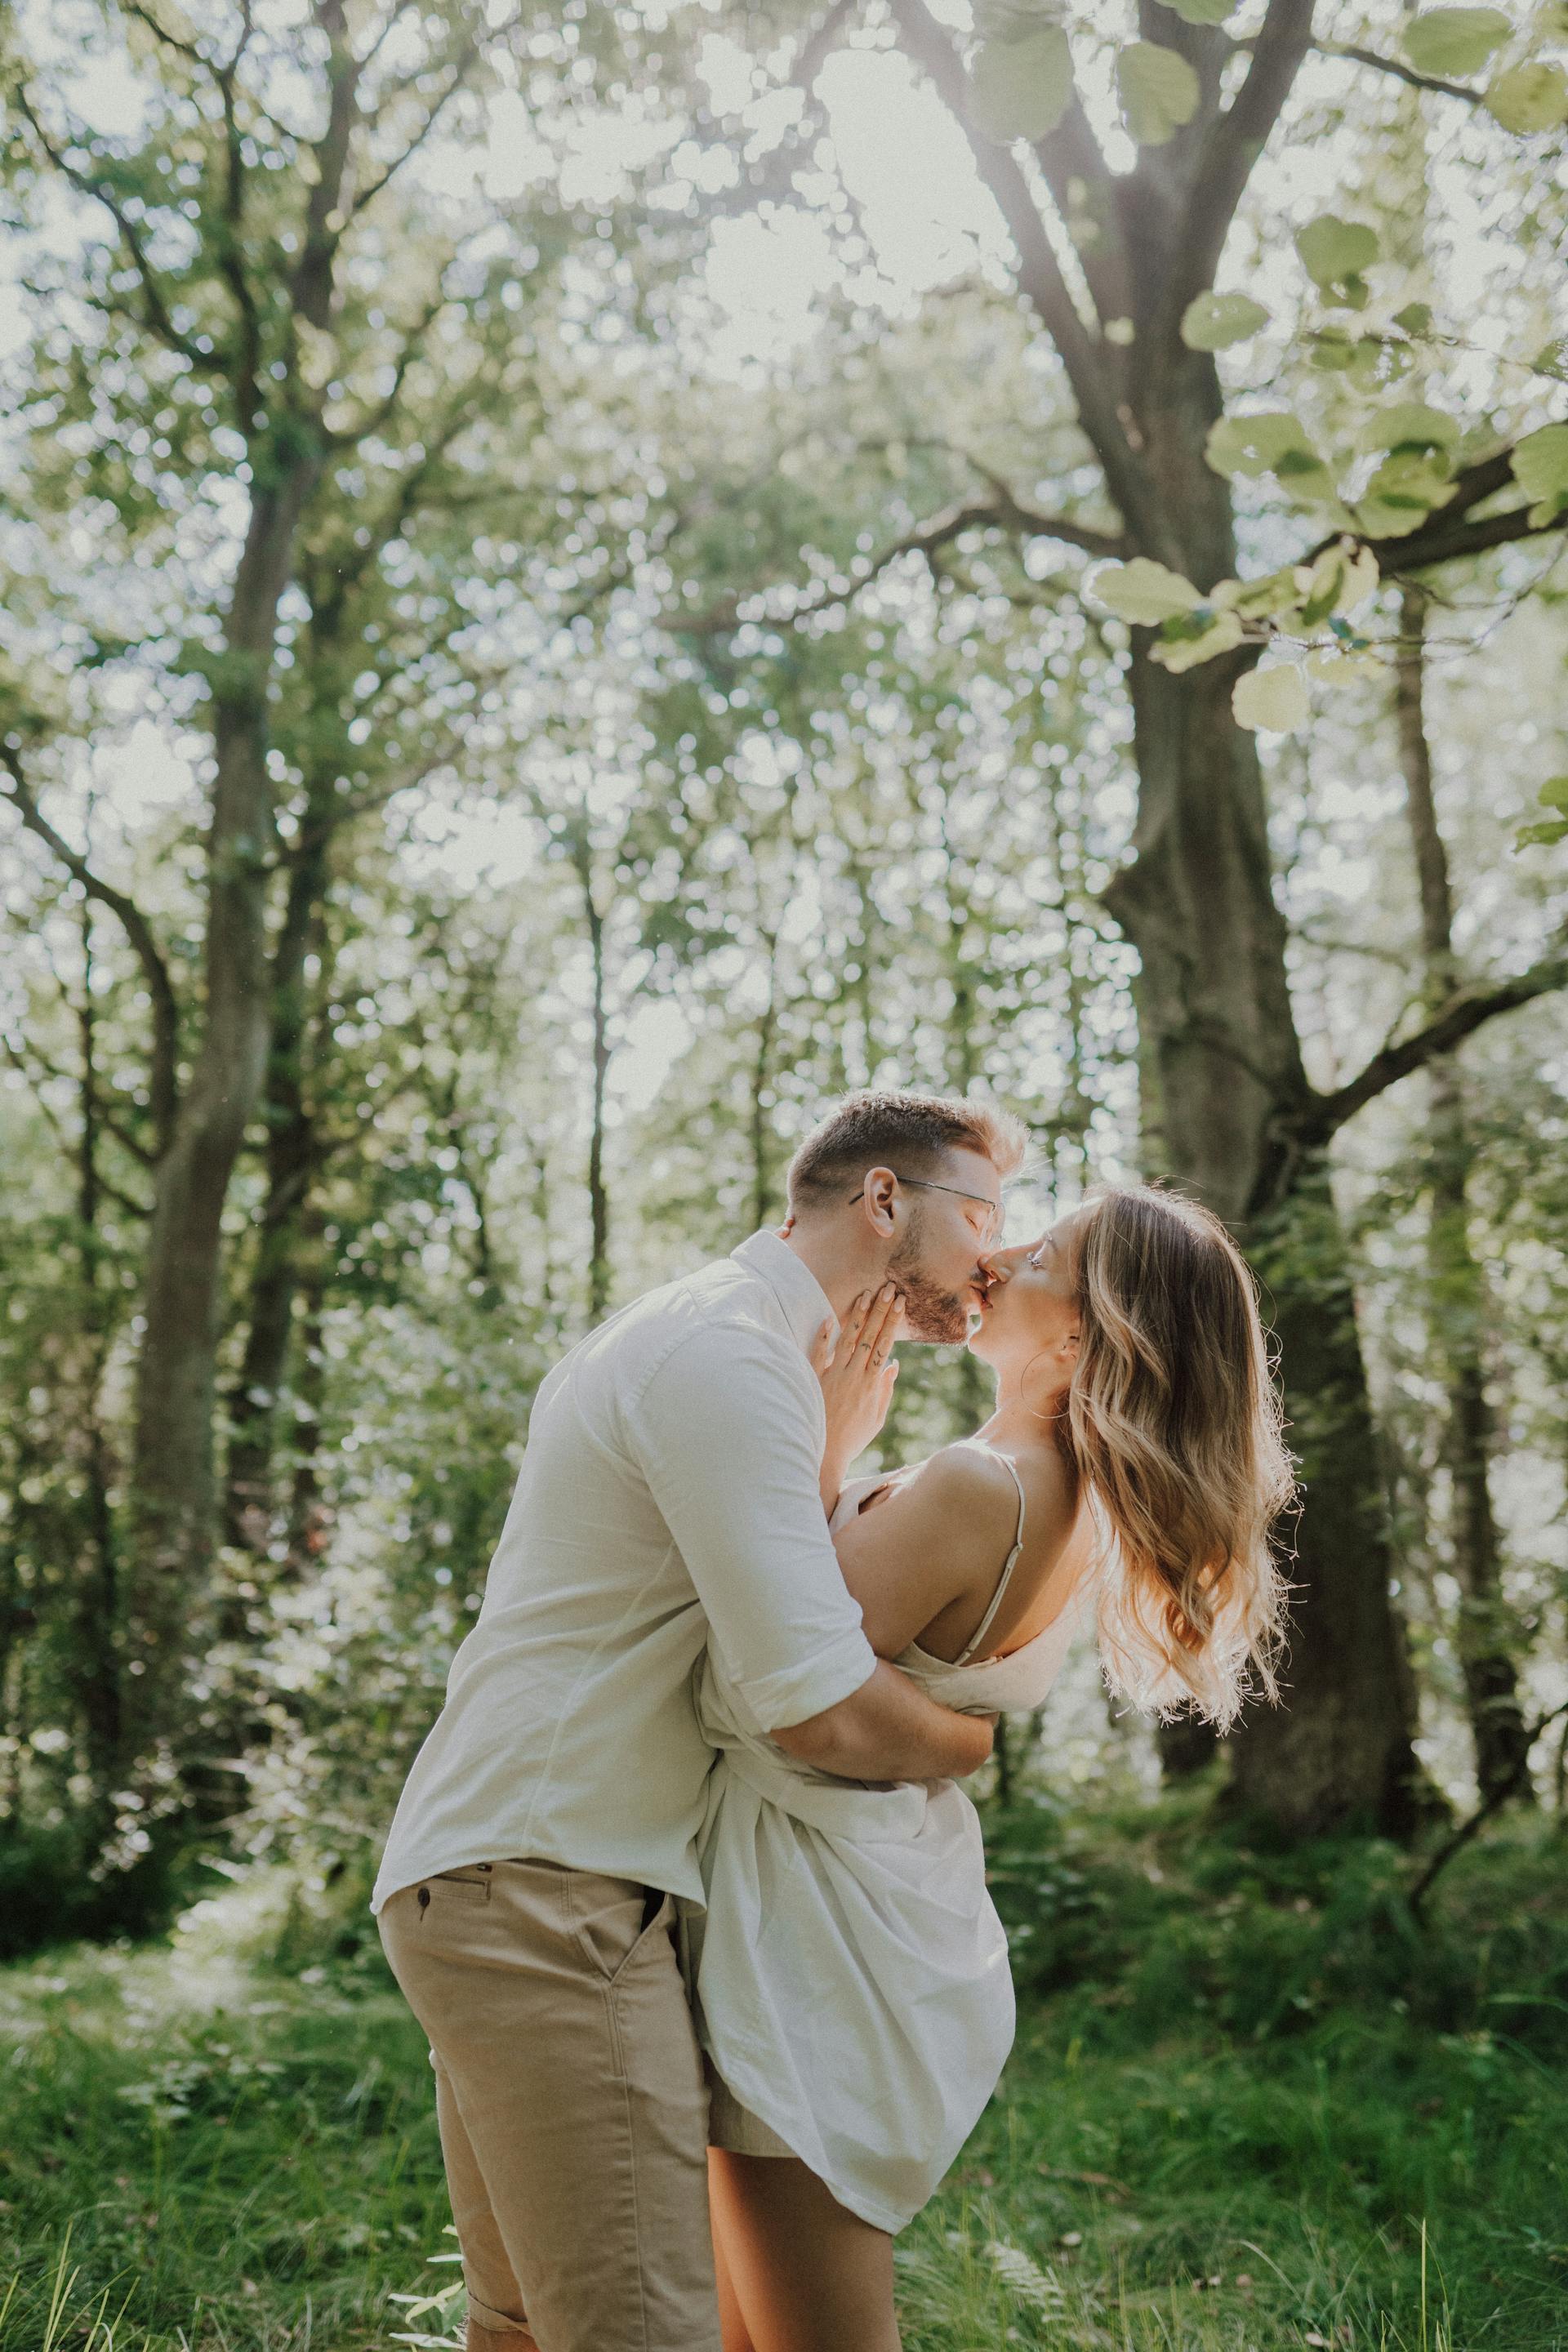 A young couple kissing in a forest | Source: Pexels